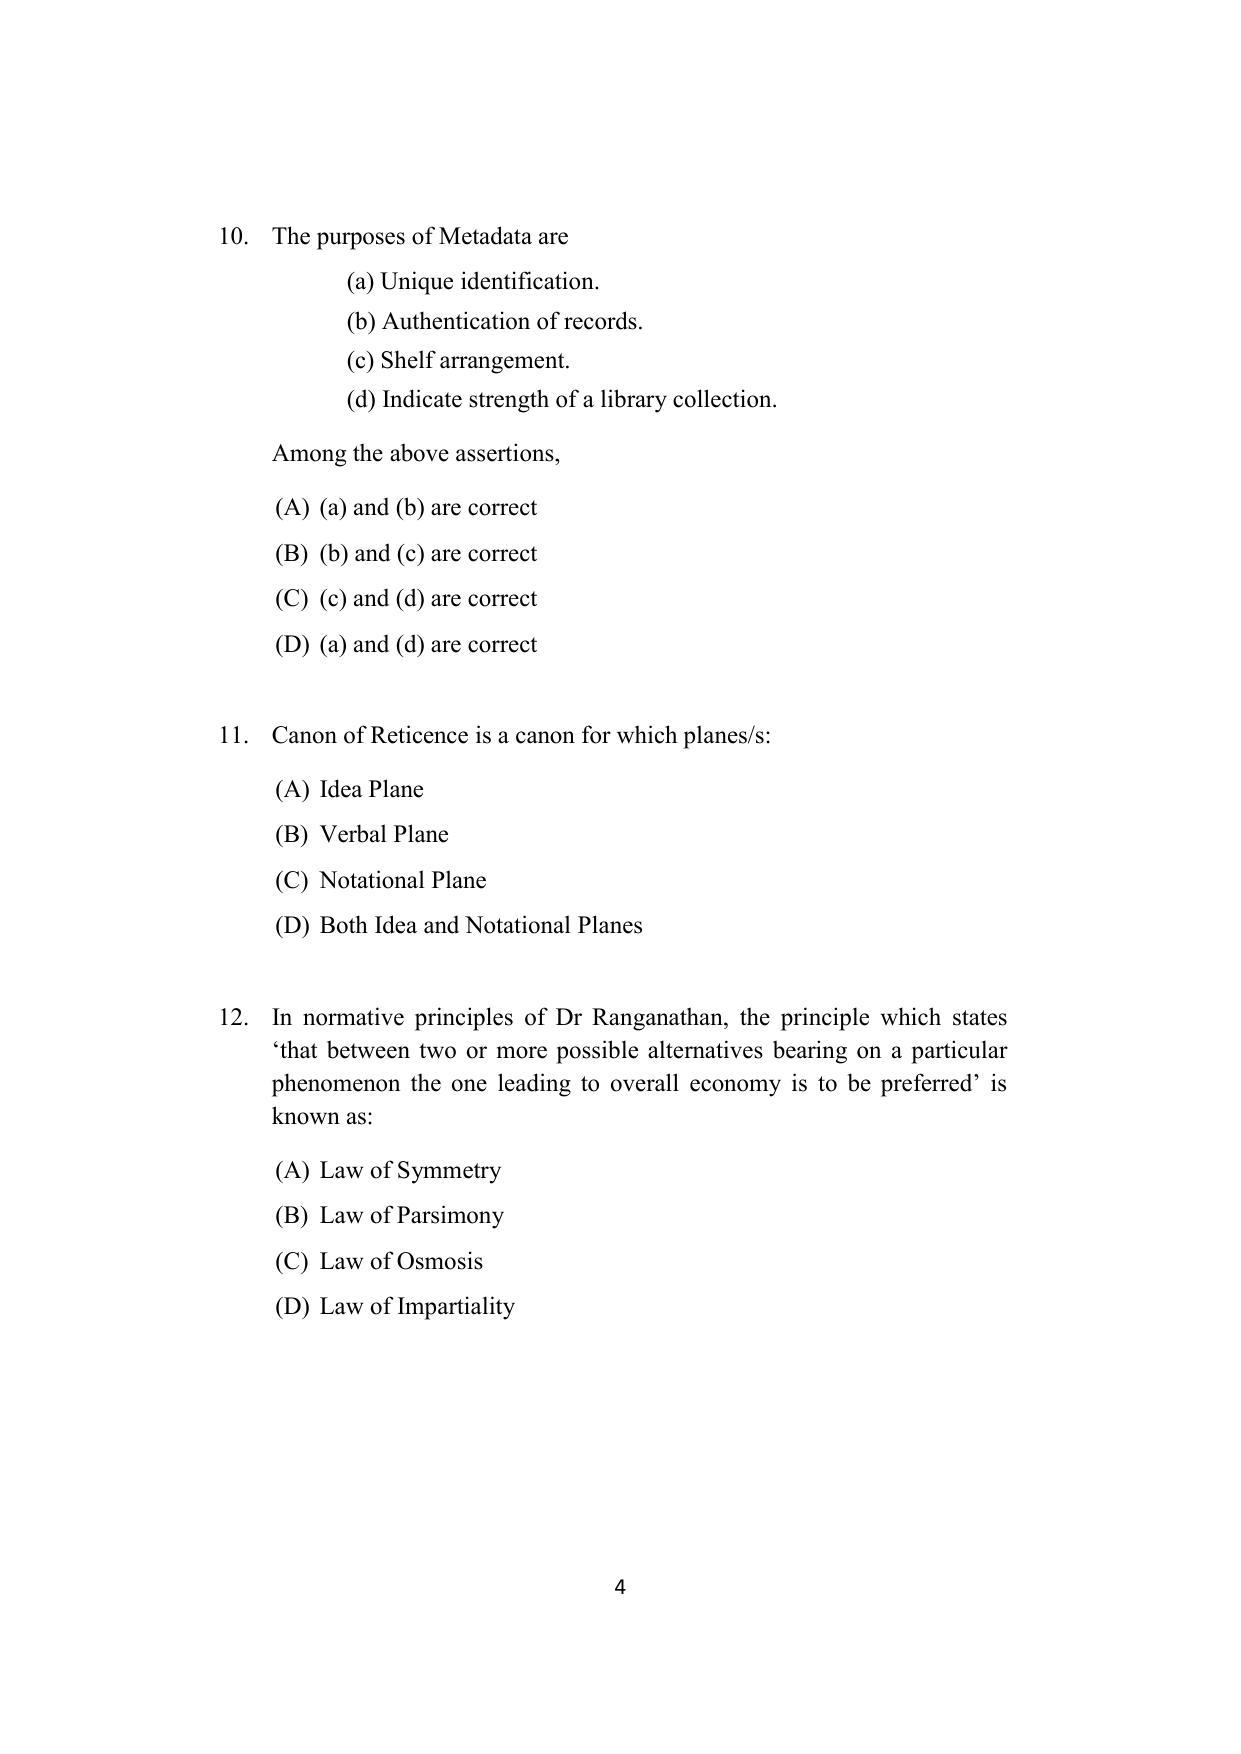 ISI Admission Test JRF in Library and Information Science LIA 2021 Sample Paper - Page 4